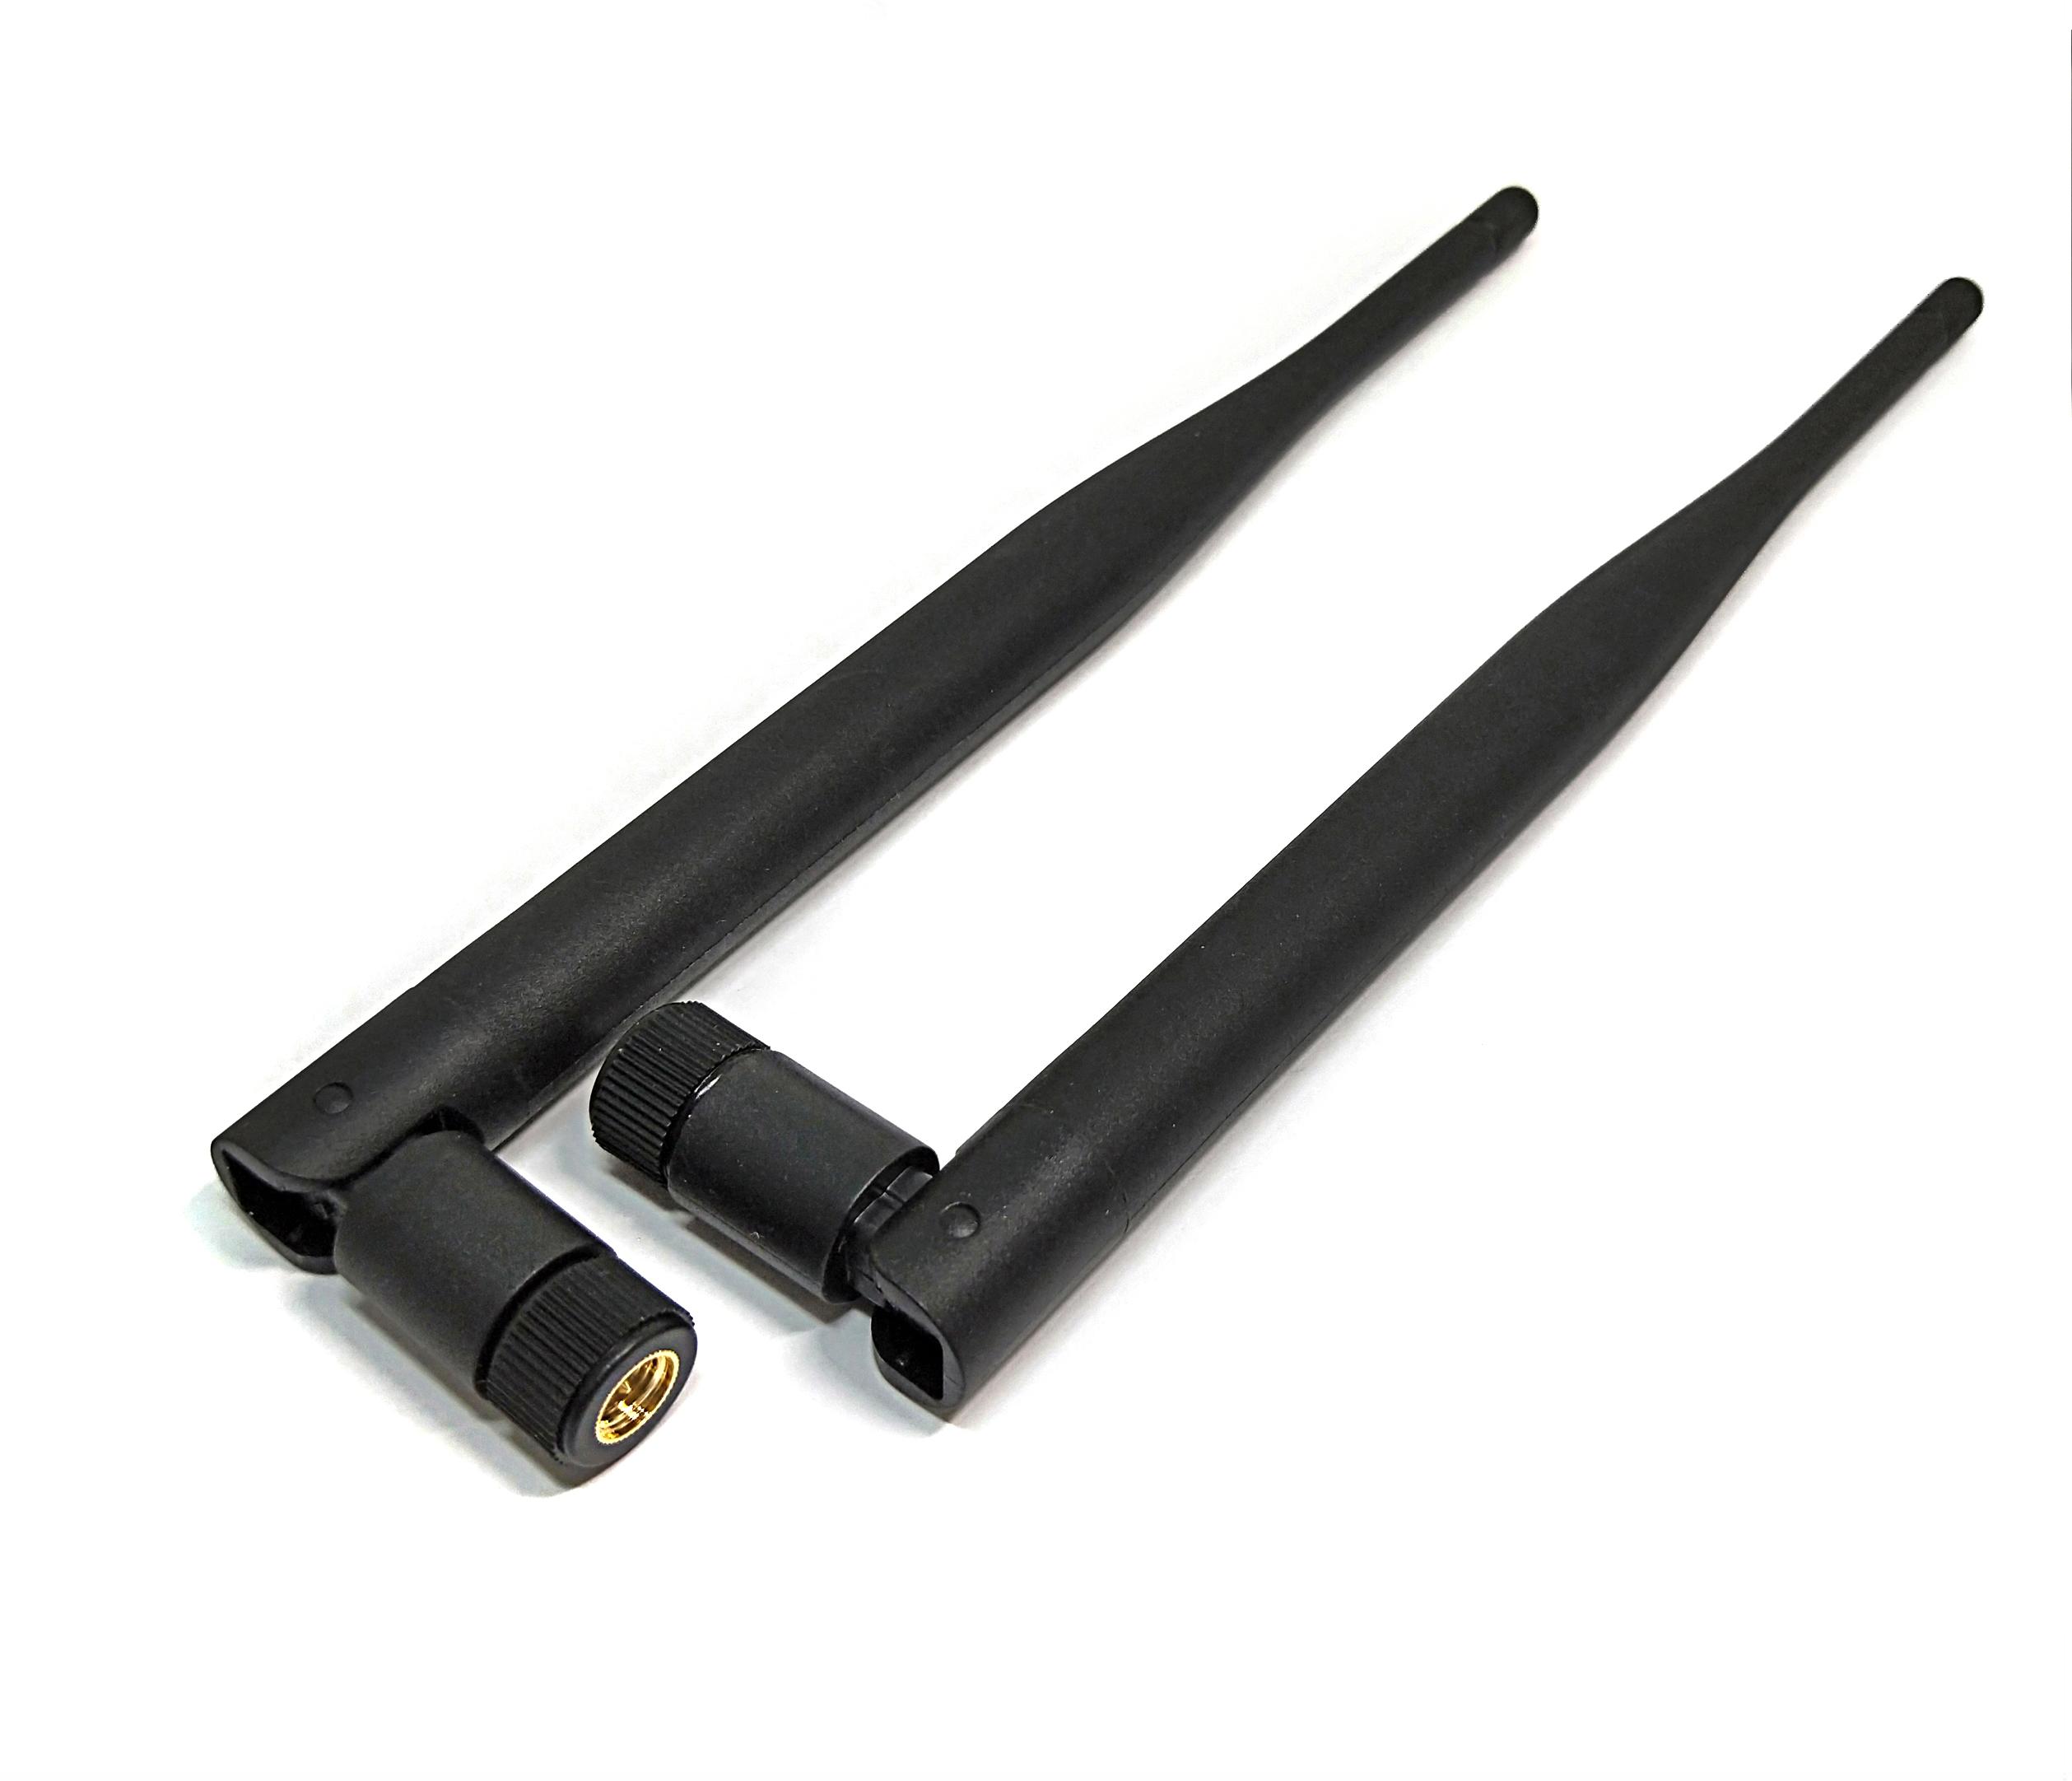 High Quality 2.4GHZ/5.8GHZ/433MHZ/868MHZ/920MHZ 5dBi Indoor wifi Antenna with SAM Connector